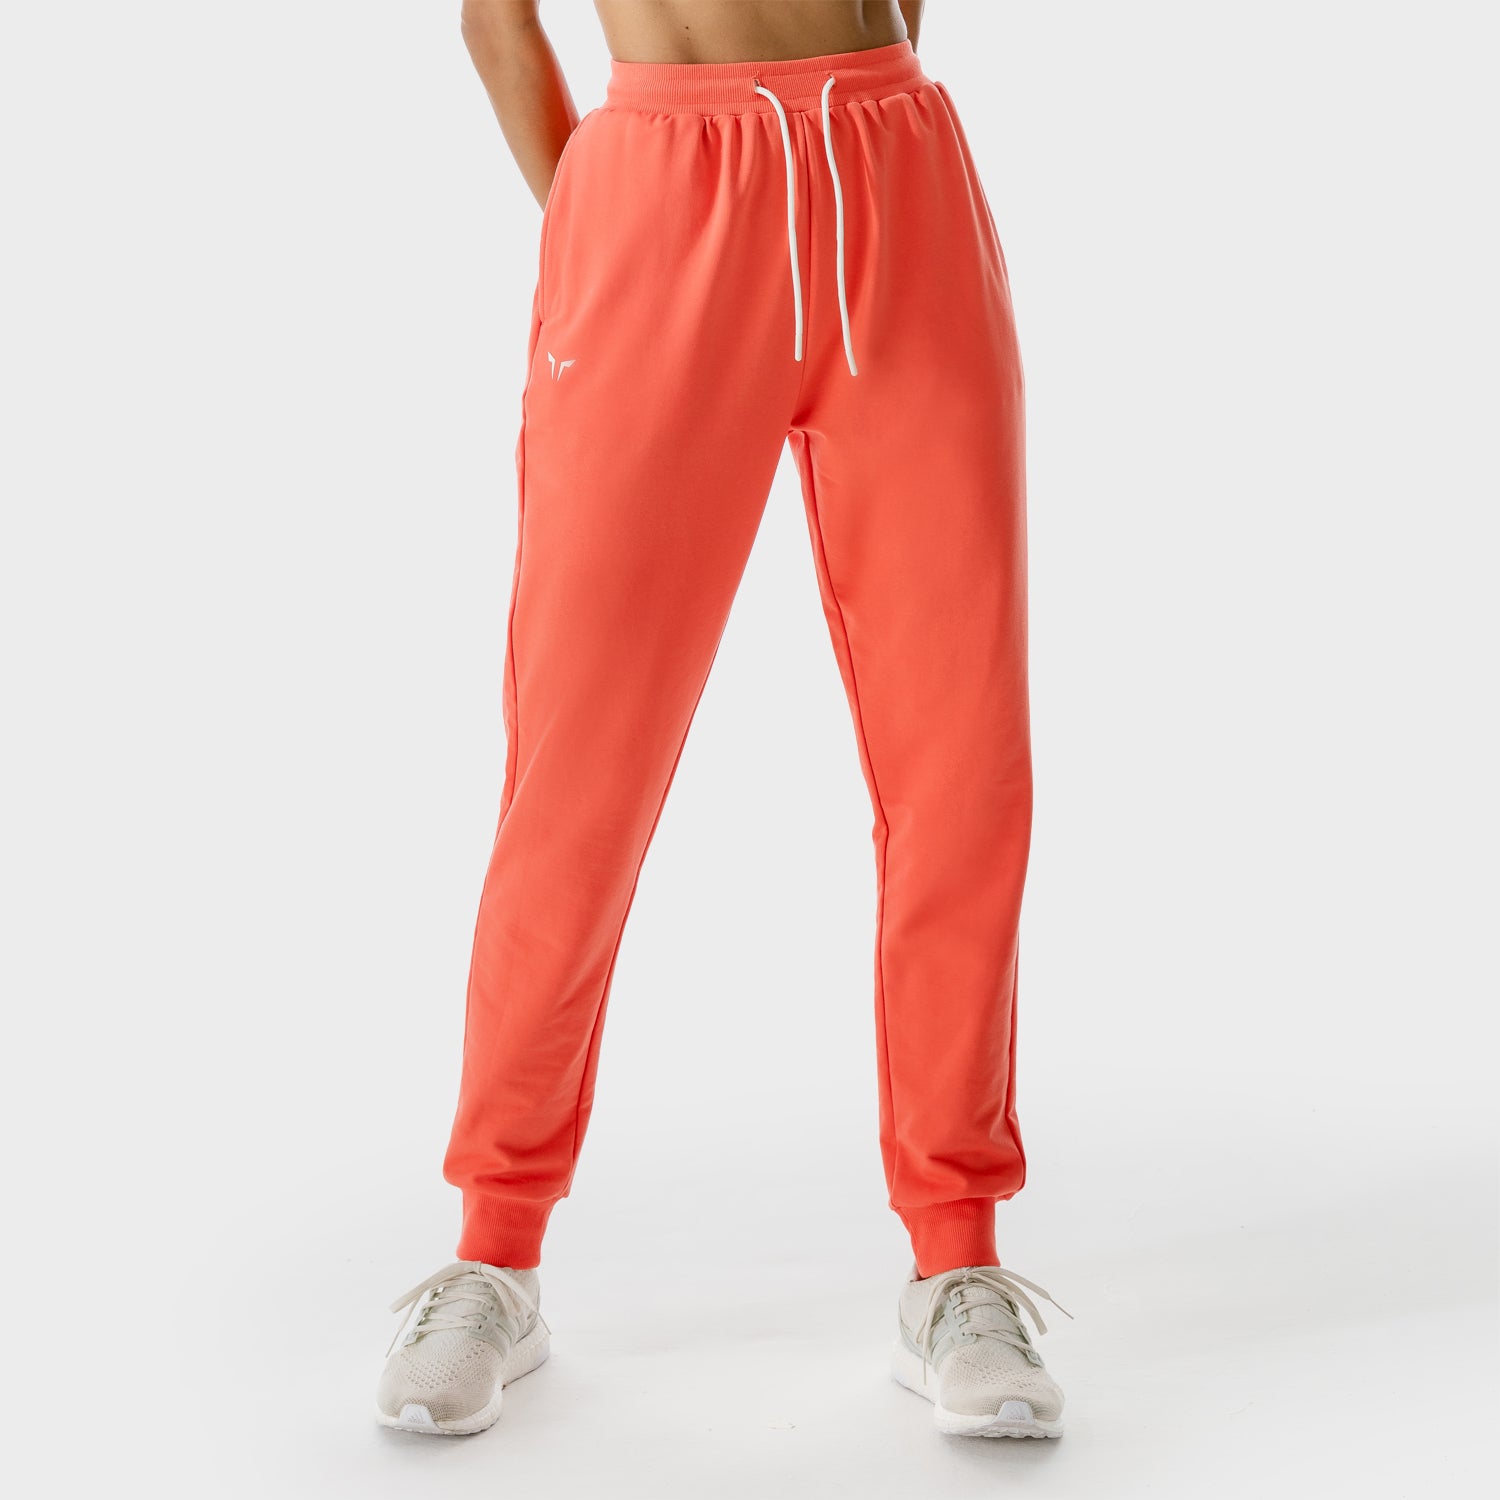 squatwolf-gym-pants-for-women-lab-joggers-hot-coral-workout-clothes